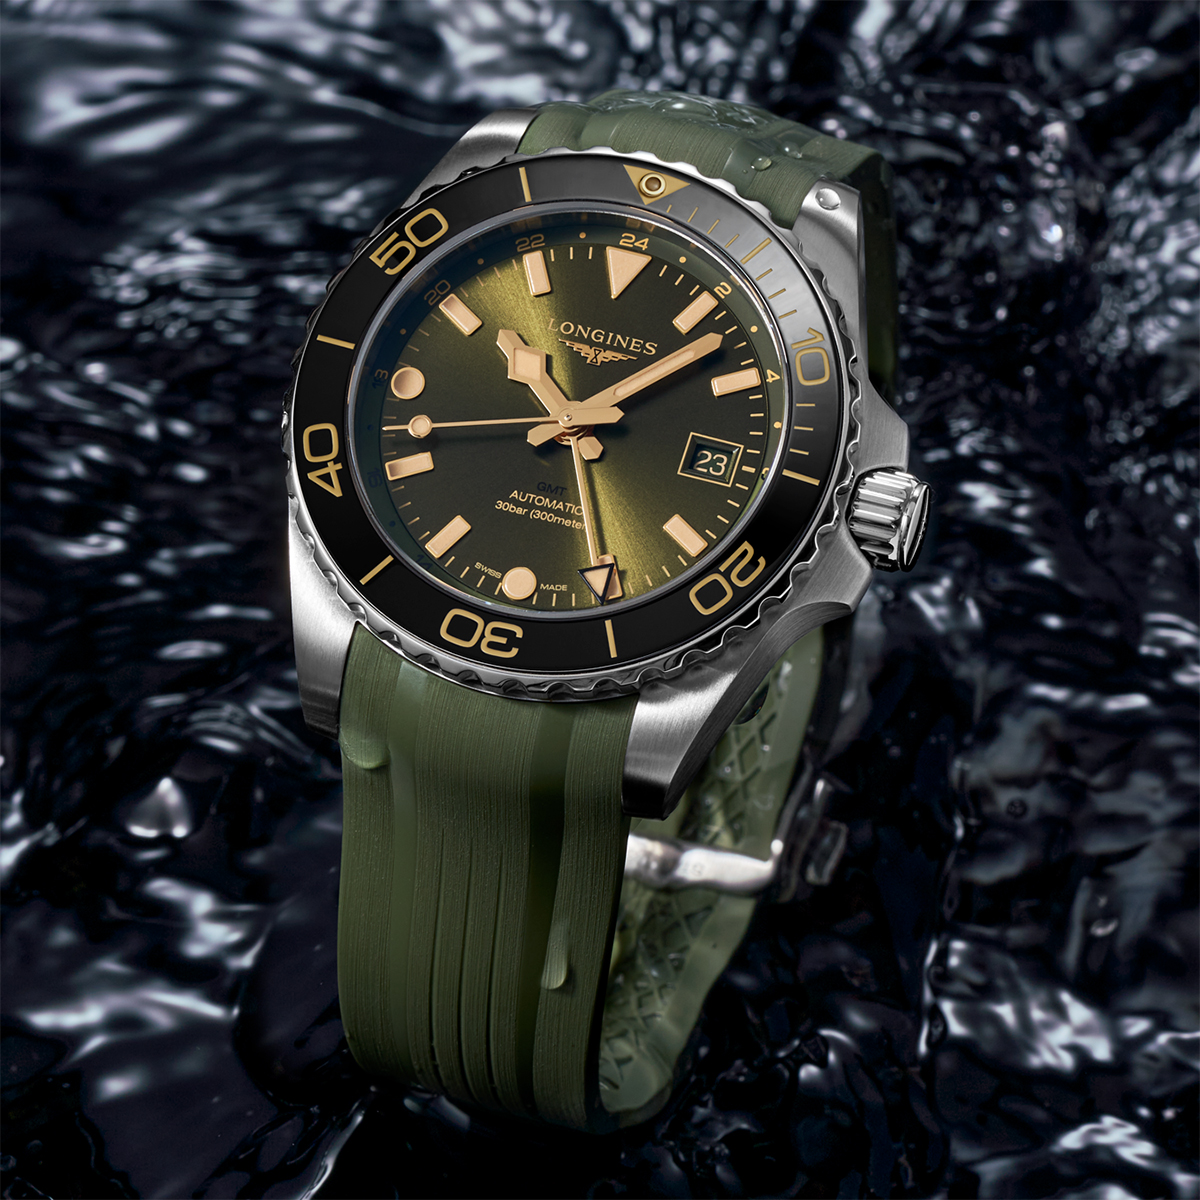 Cortina-Watch-Longines-HydroConquest-GMT-online-exclusive-lifestyle